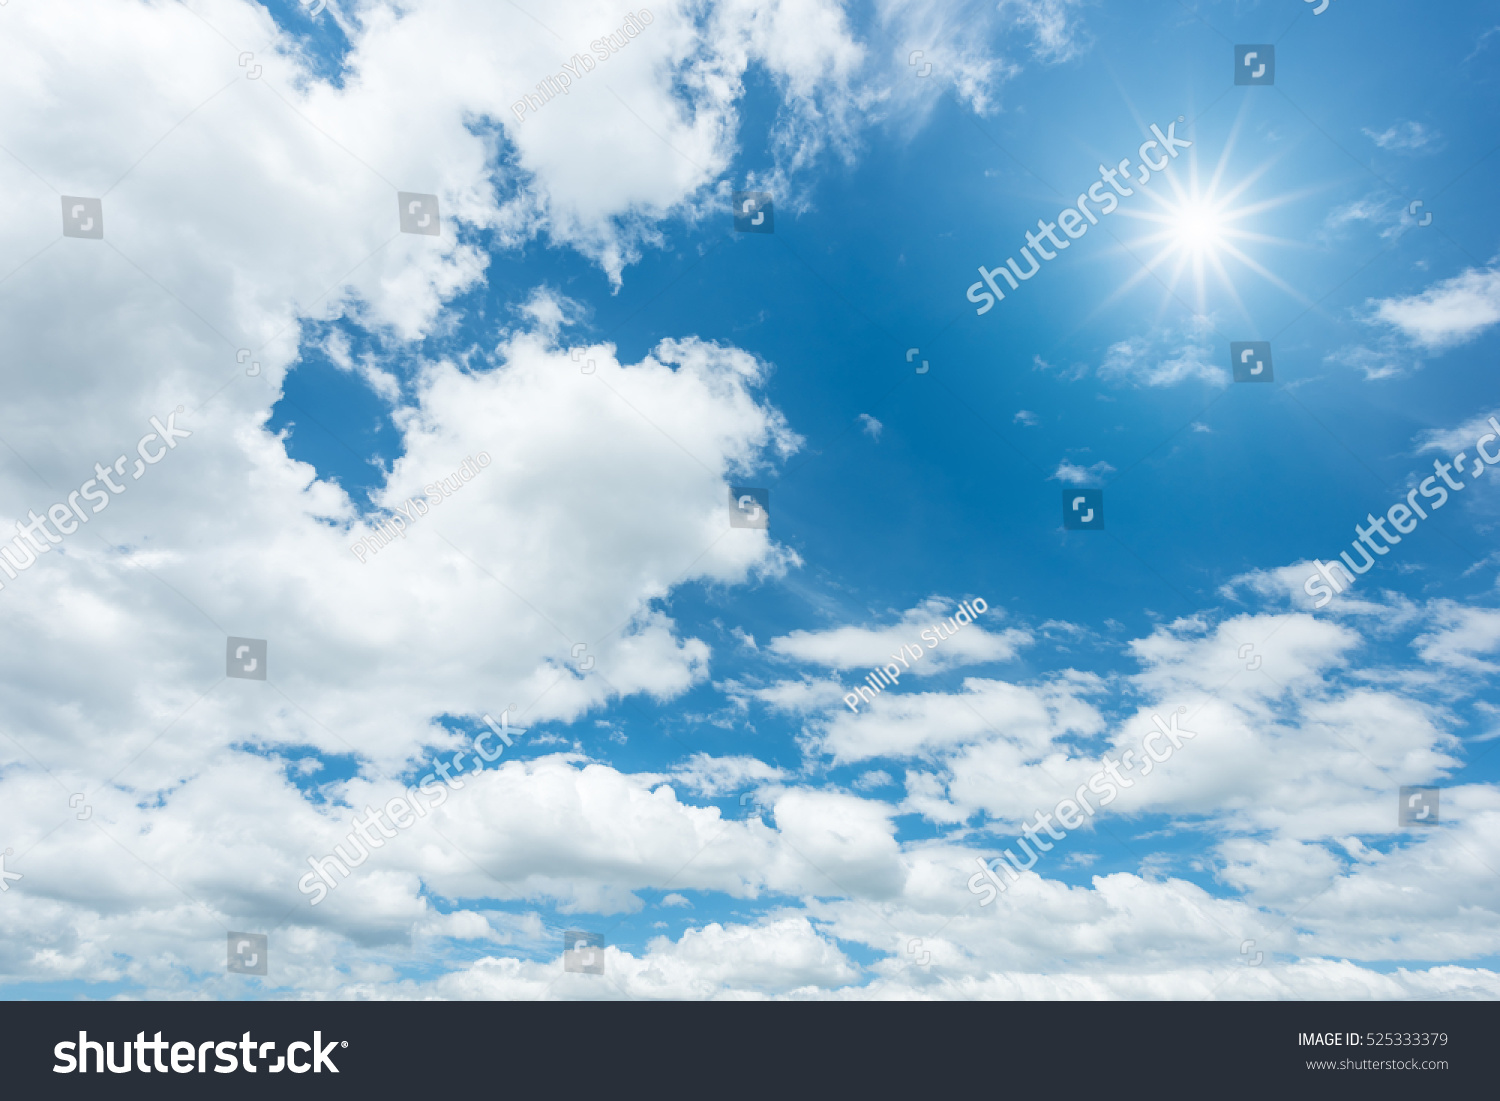 Blue sky with clouds and sun reflection #525333379